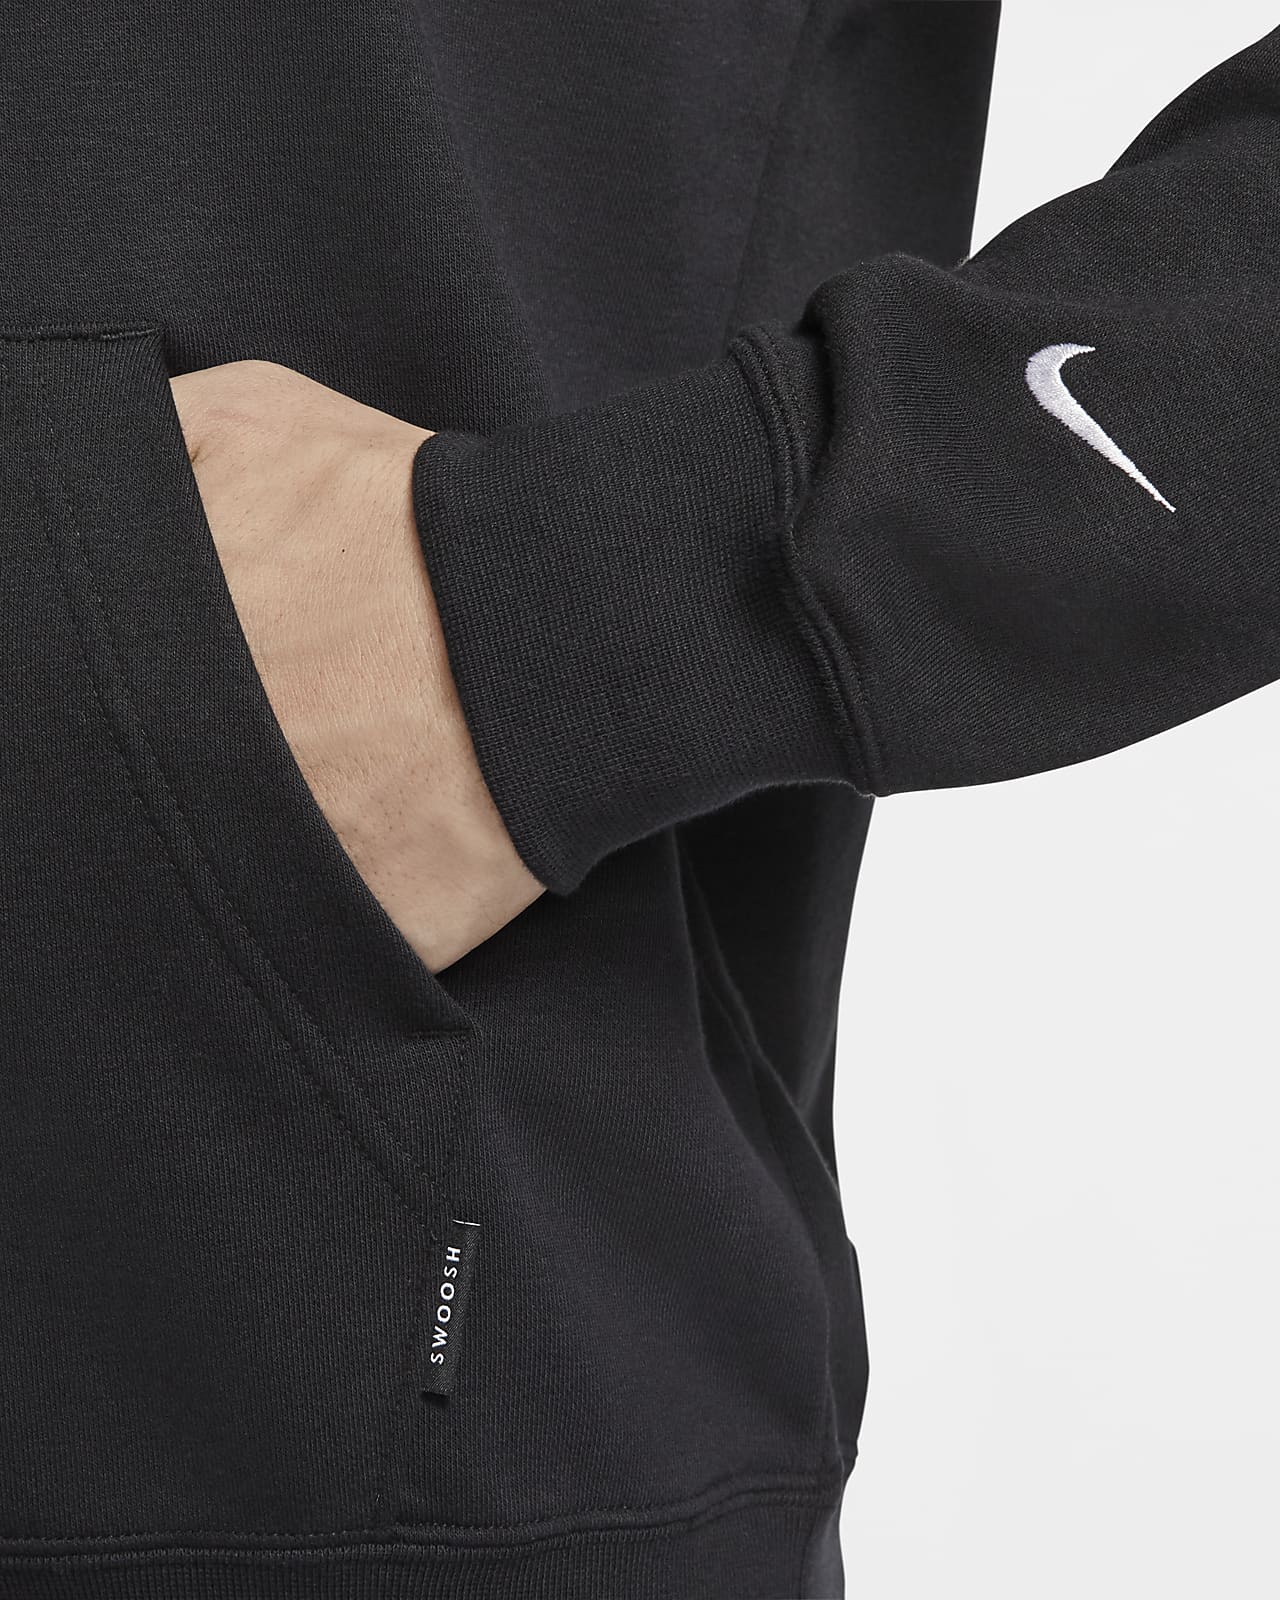 french terry pullover hoodie nike